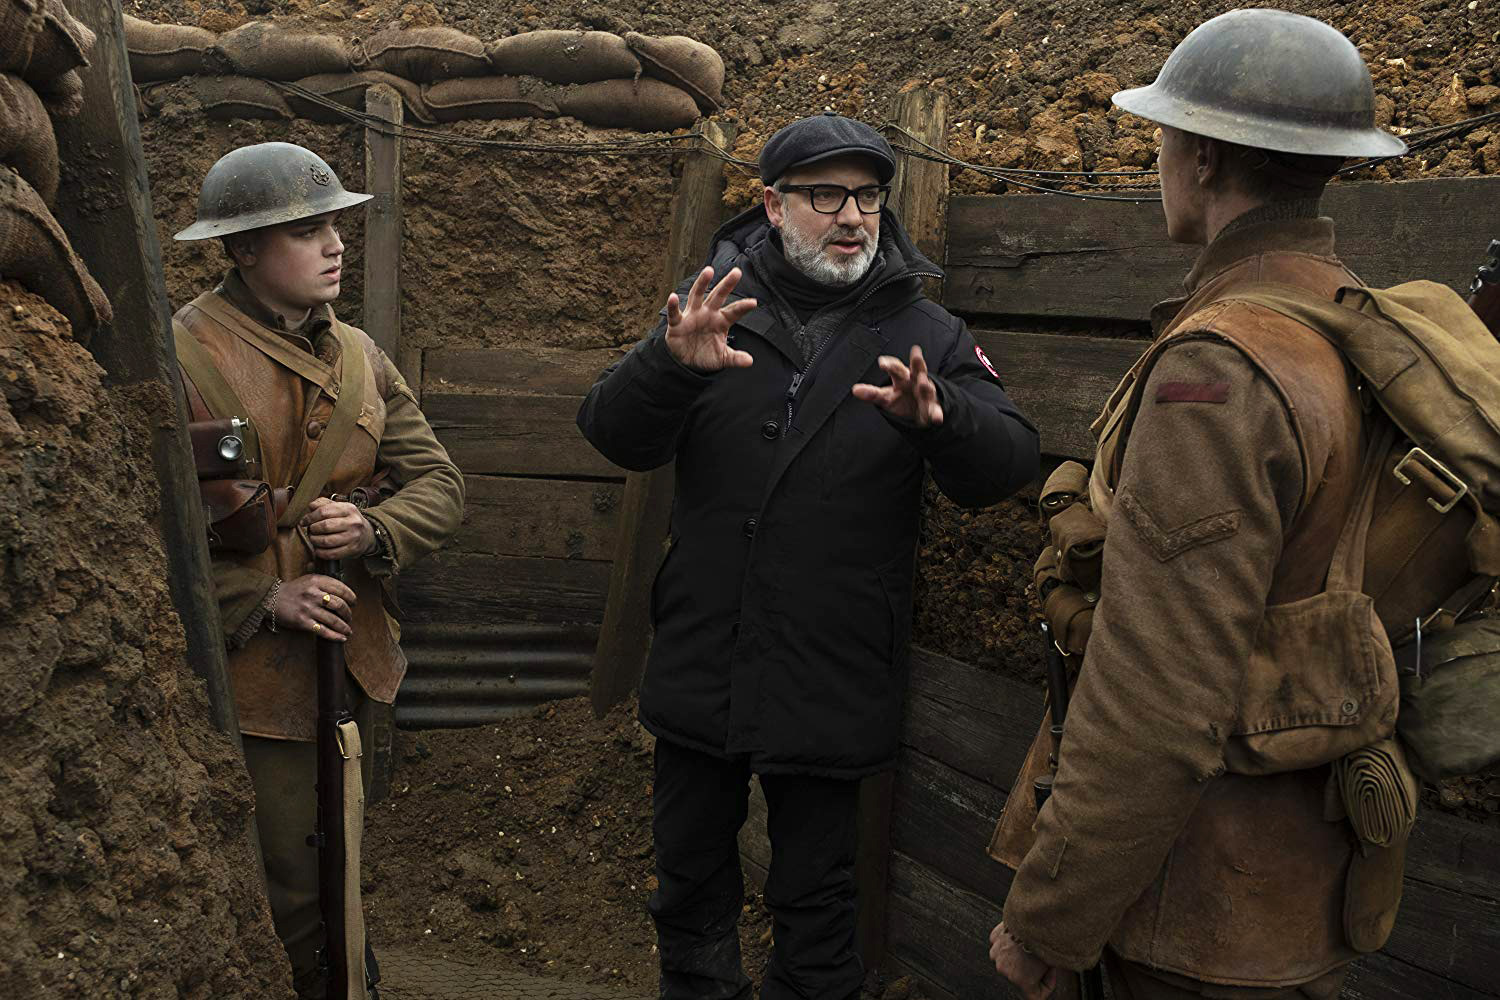 PHOTO: Director Sam Mendes speaks with actors George McKay and Dean-Charles Chapman on the set of the 2019 film, "1917."